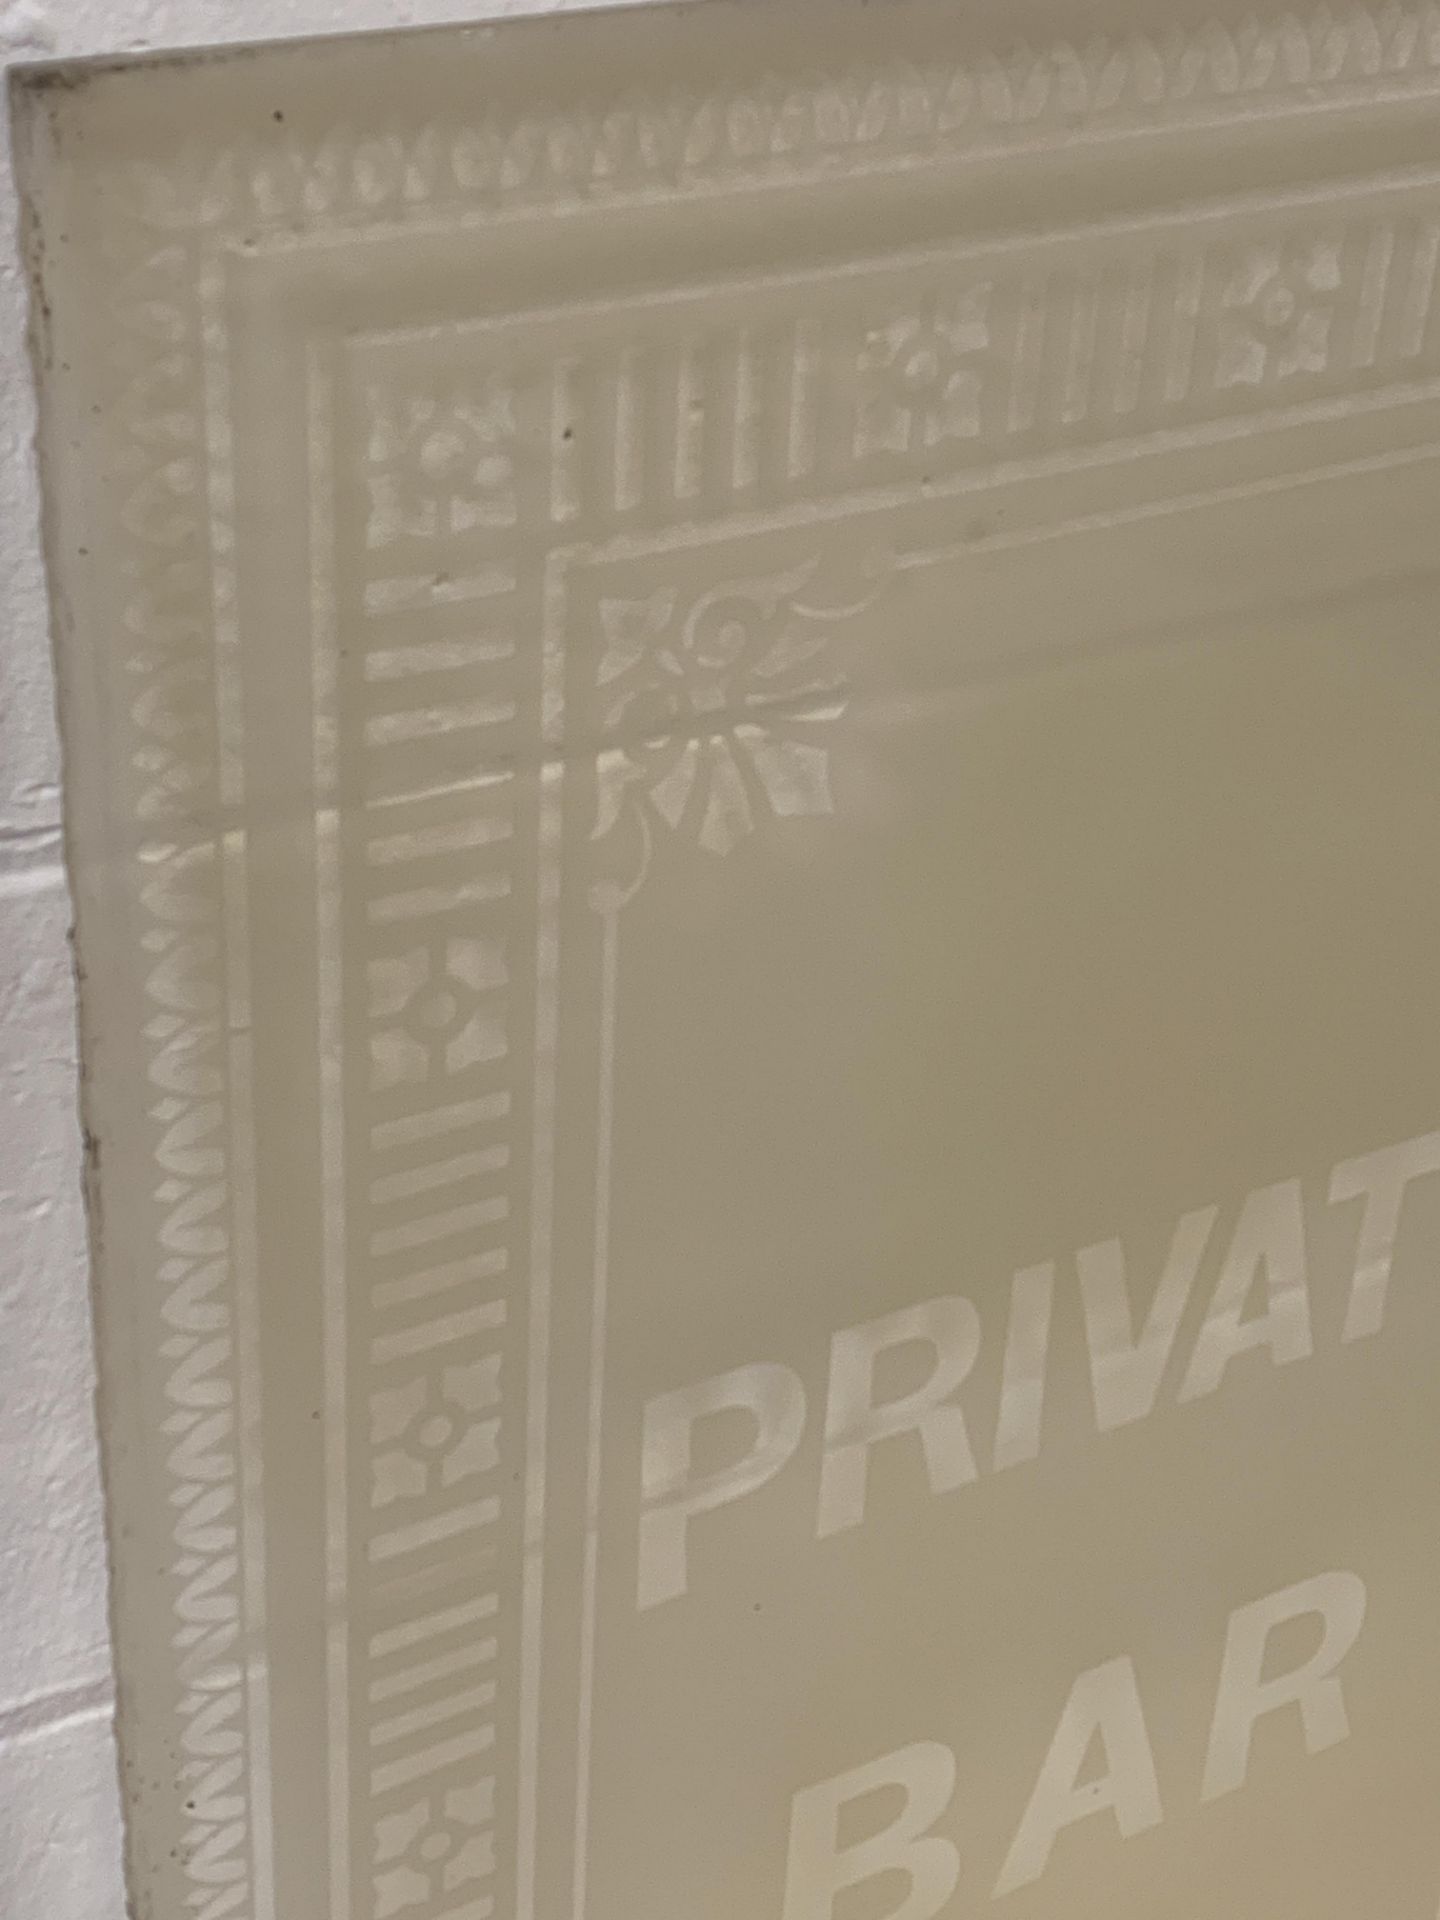 Glass pub sign etched "Private Bar" - Image 2 of 4